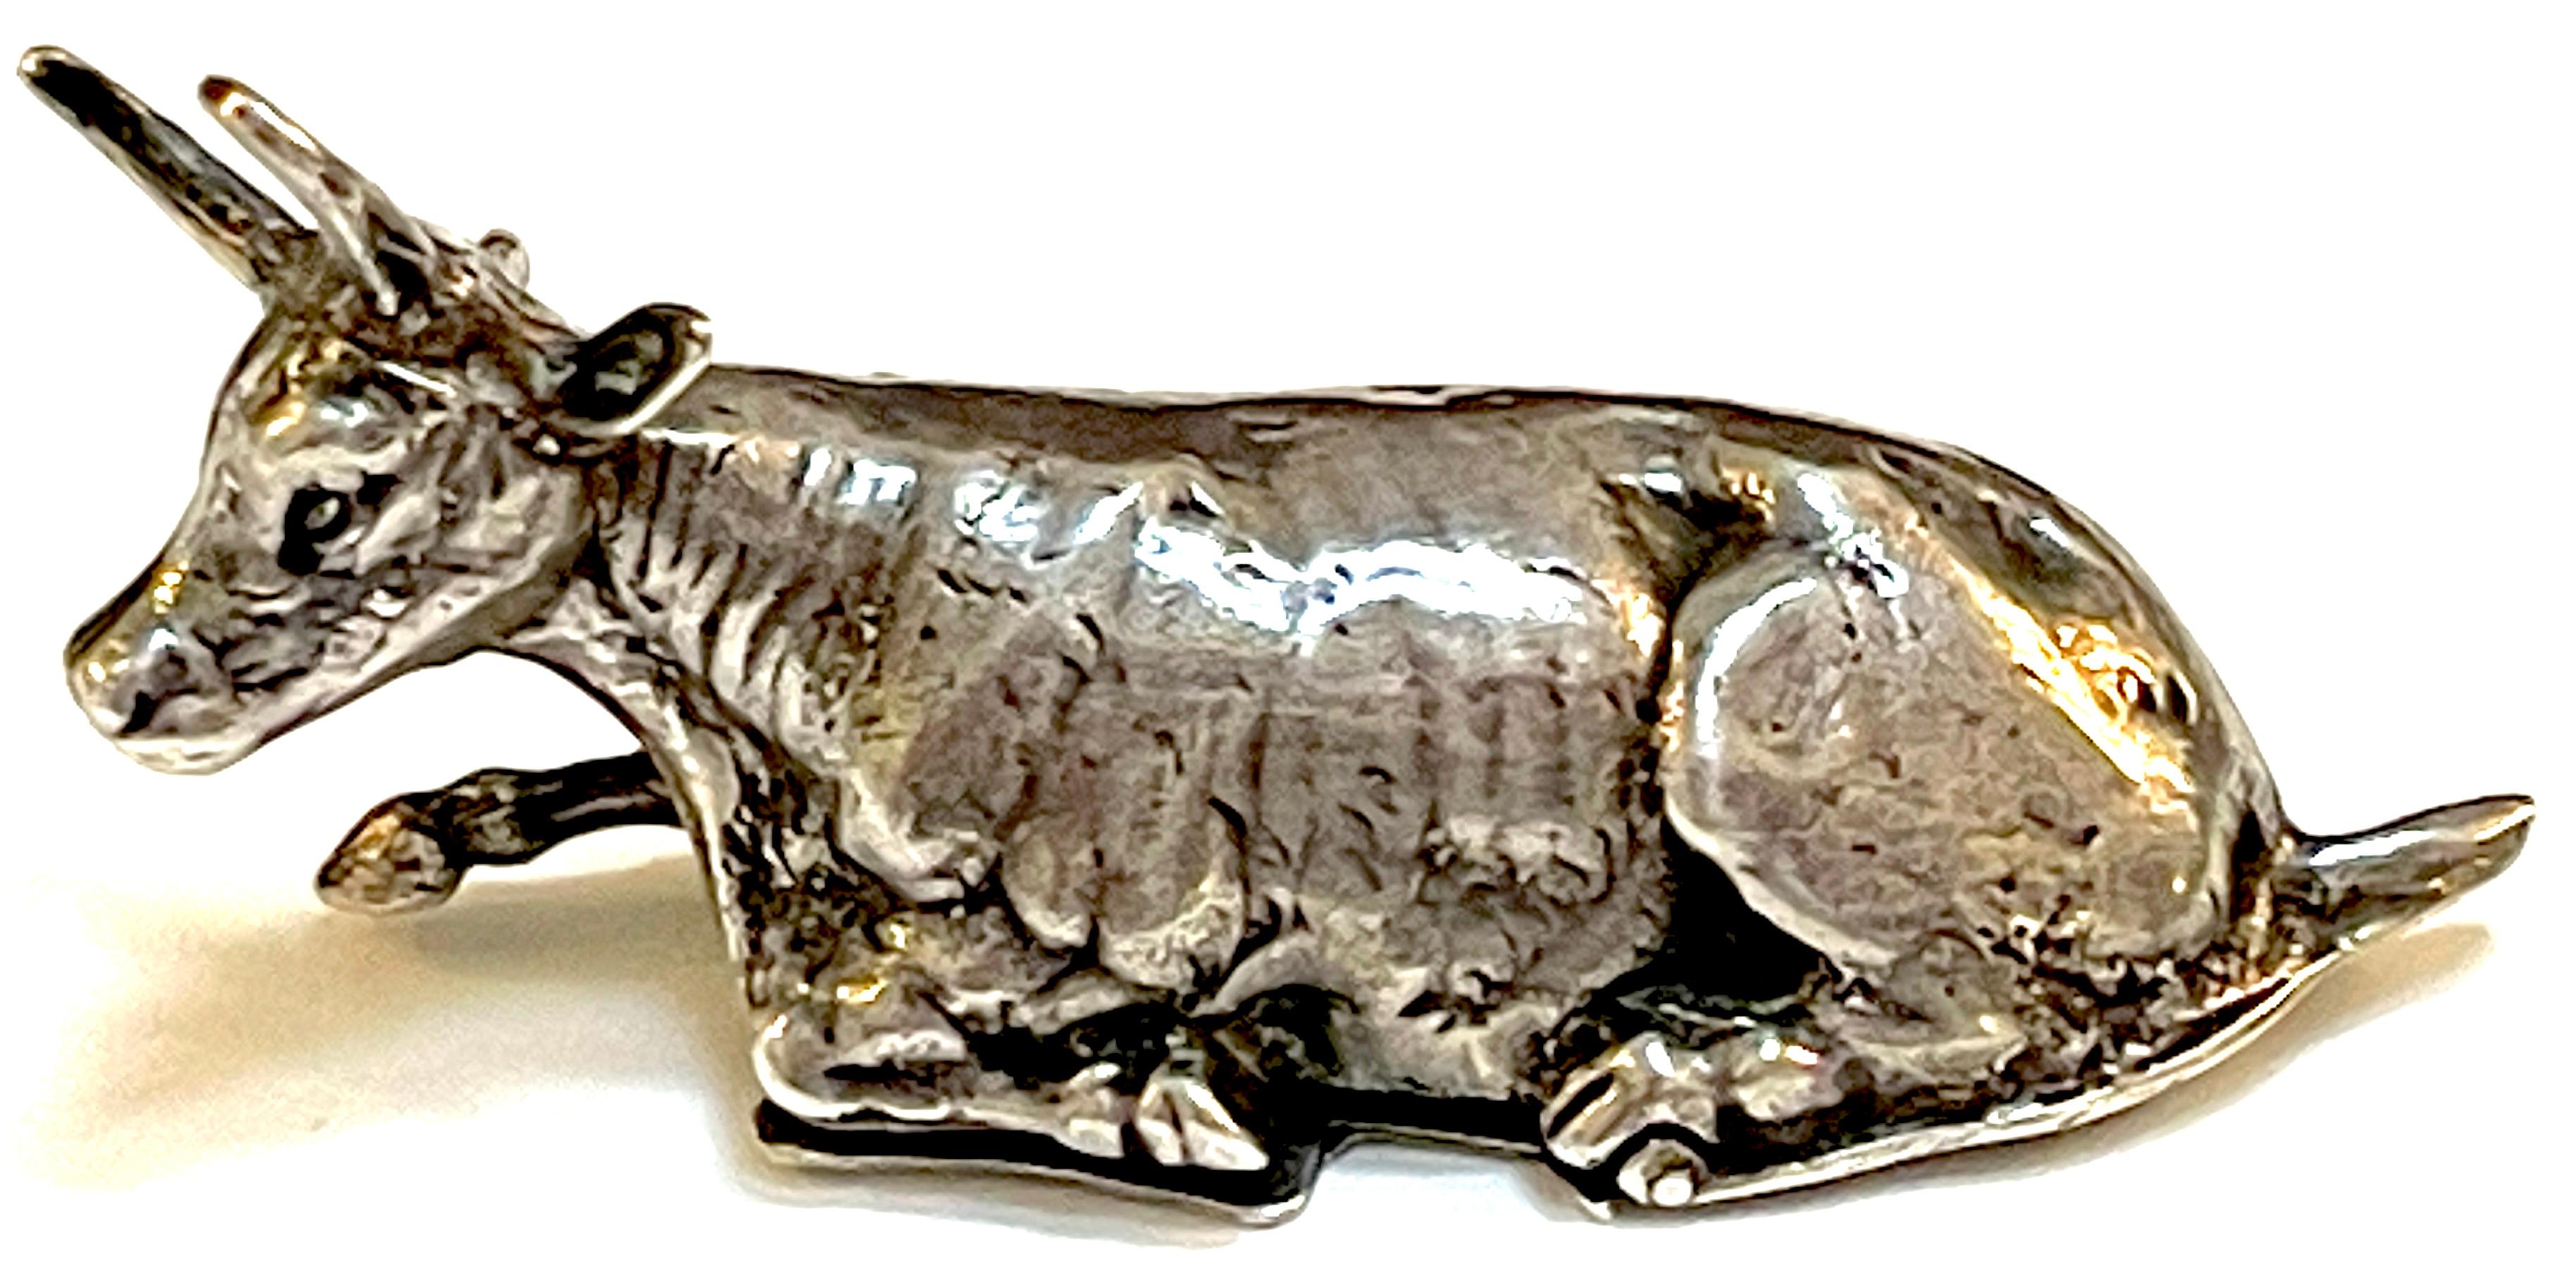 19th Century English Sterling Steer Snuff Box, London, 1862 
With numerous hallmarks, including the Maker's Mark of 'BM'

For aficionados of 19th-century English silver, we are pleased to offer this exquisite Sterling Steer Snuff Box, a rare marvel